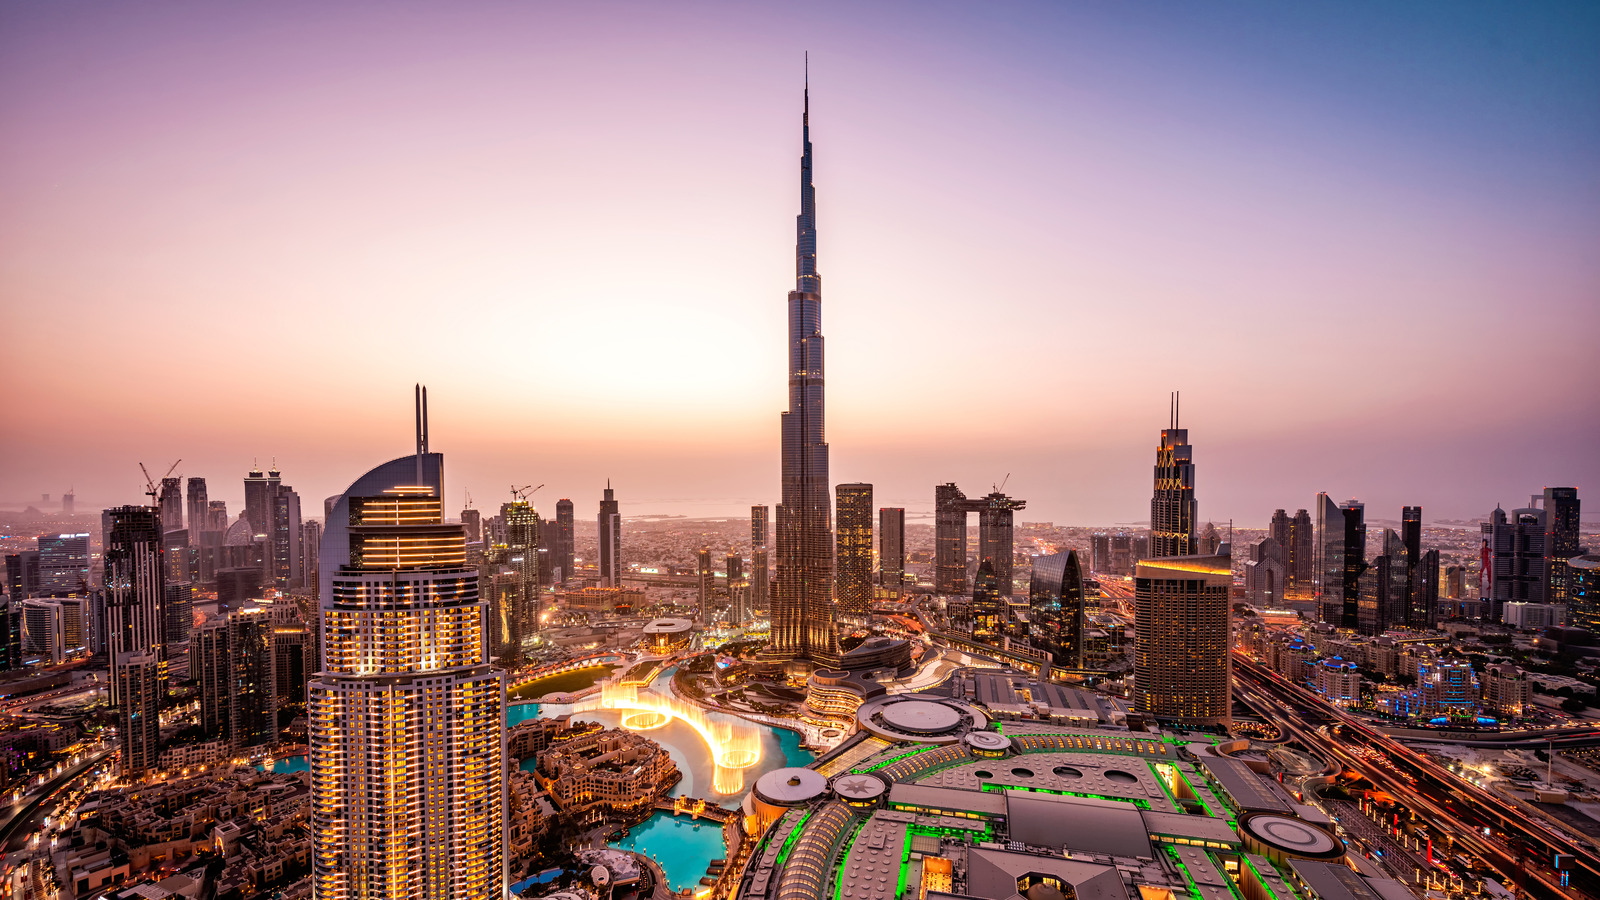 What You Should Know Before Planning A Visit To Dubai's Burj Khalifa